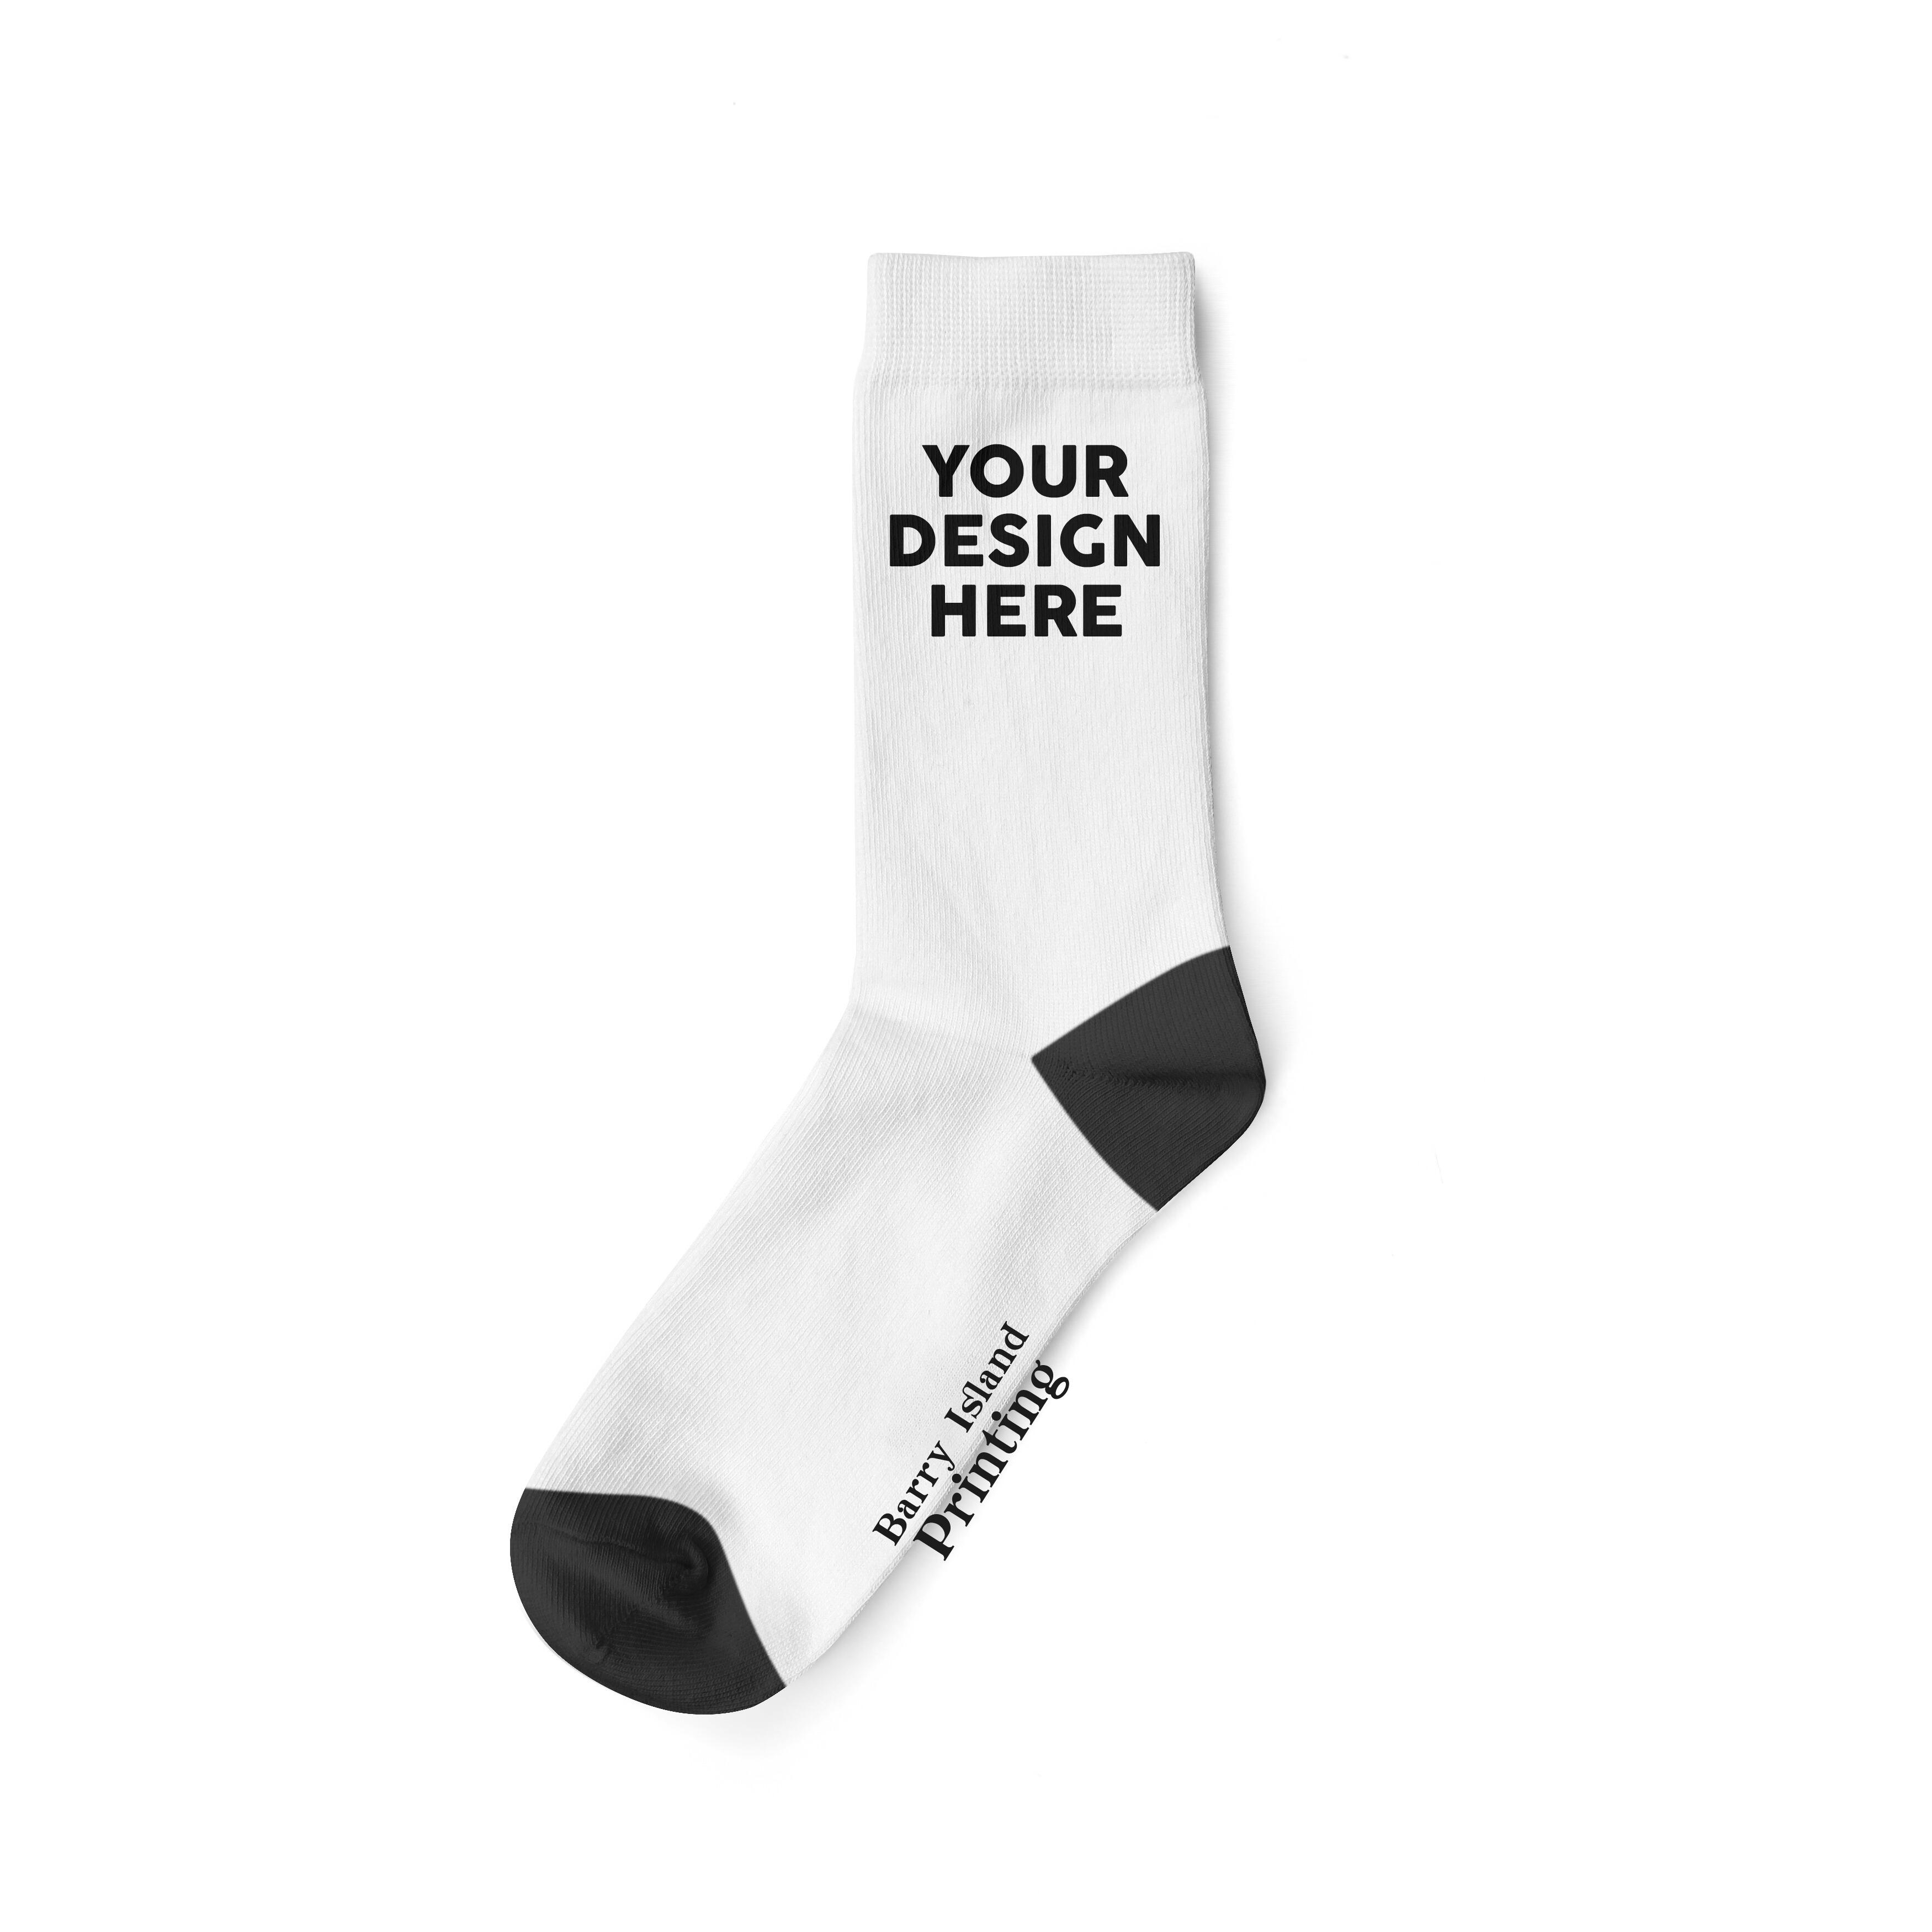 One Step at a Time Inspirational Design Printed on Socks - White